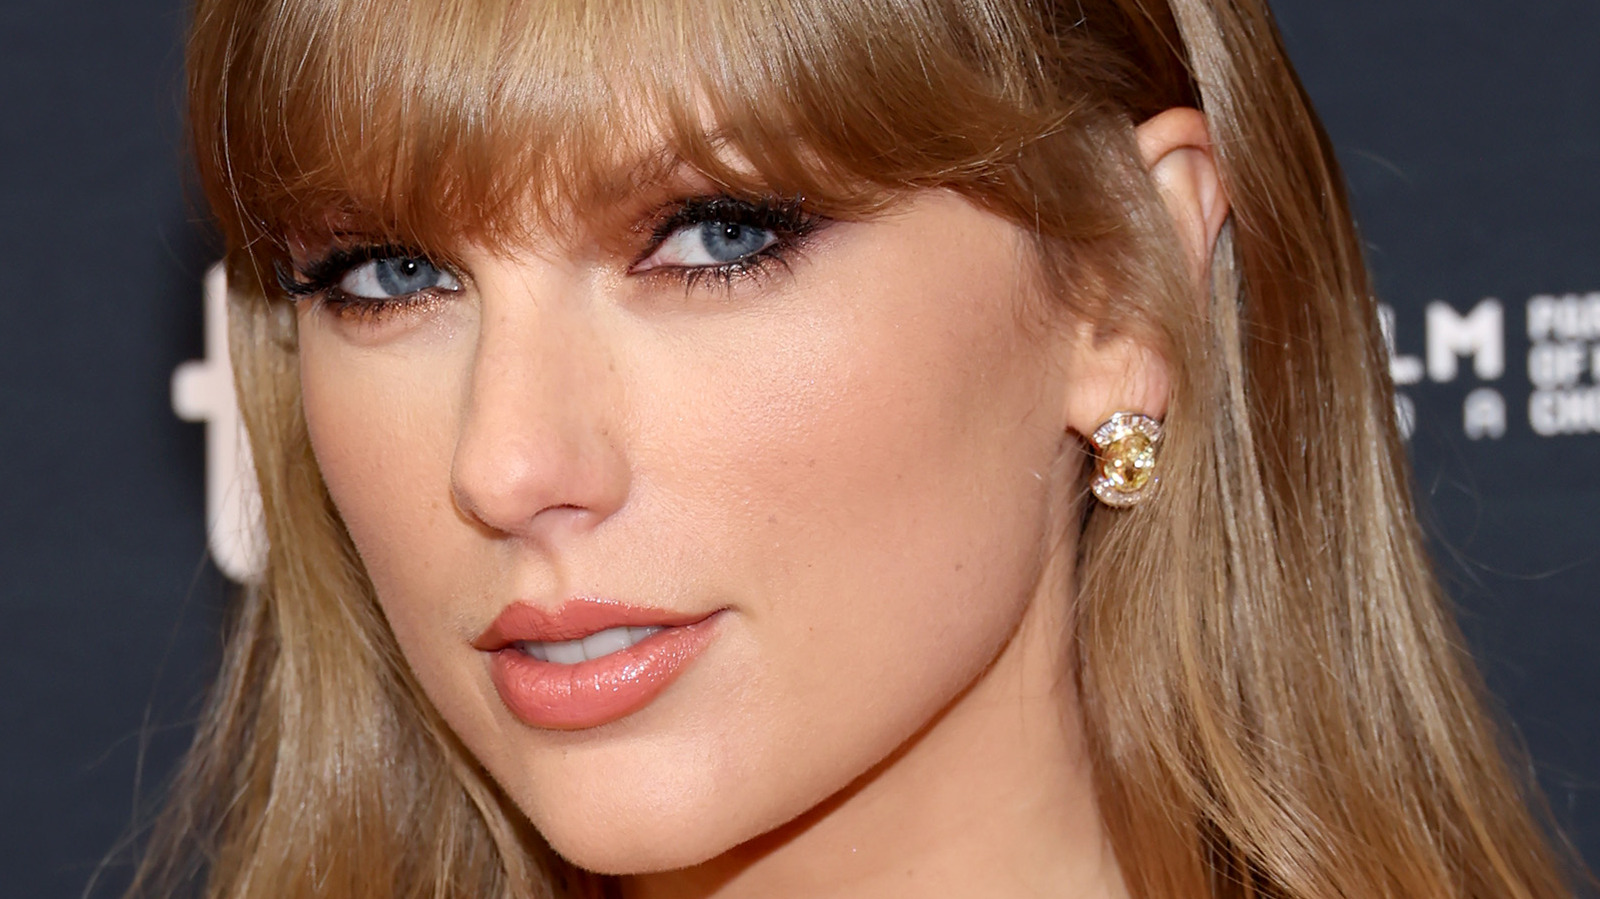 What's The Real Meaning Of Karma By Taylor Swift? Here's What We Think